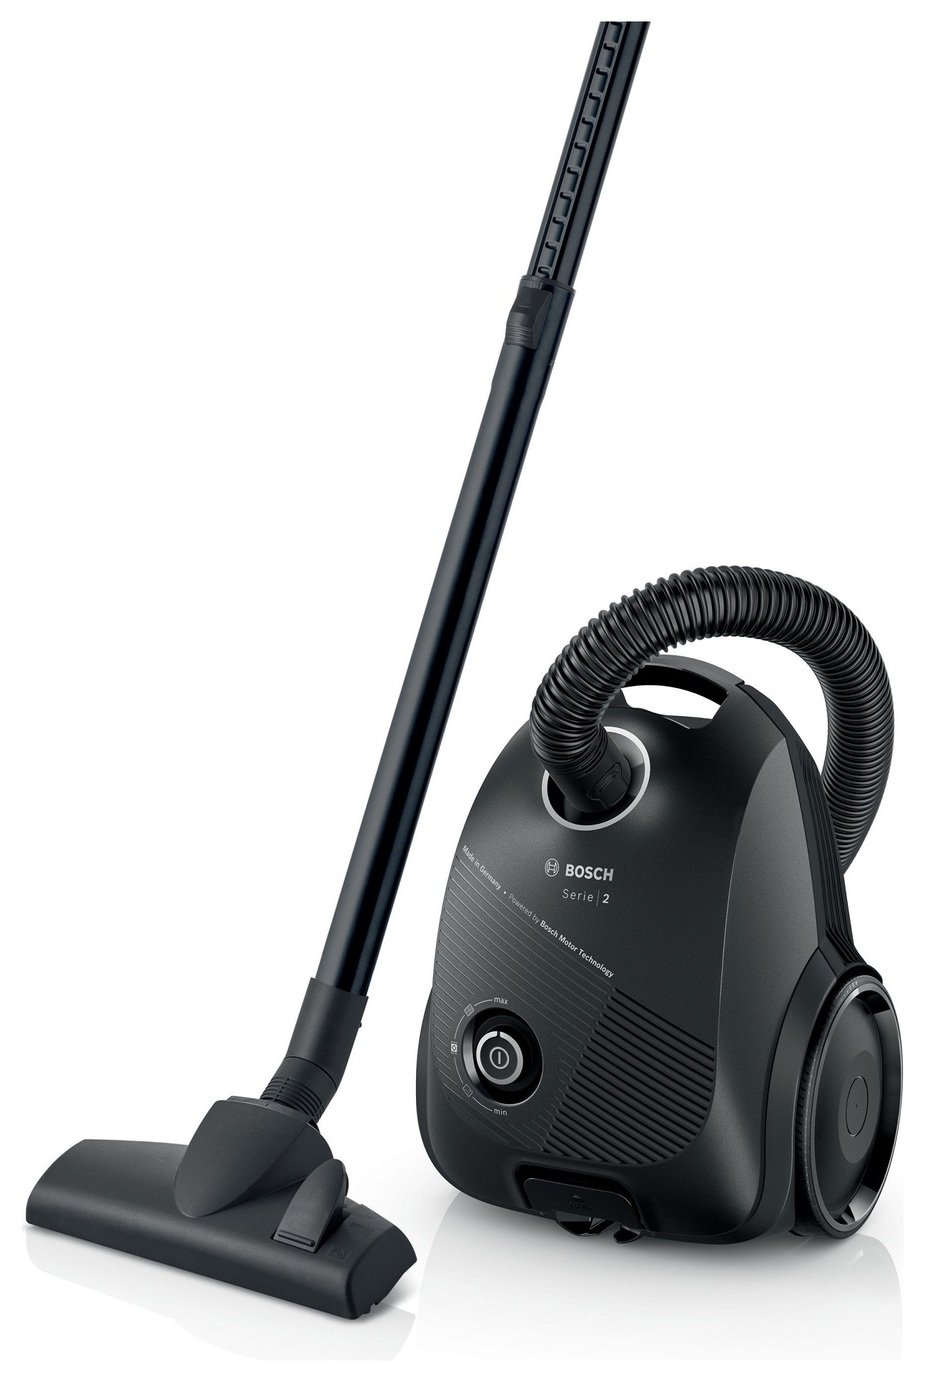 Bosch Serie 2 ProEco Corded Bagged Cylinder Vacuum Cleaner